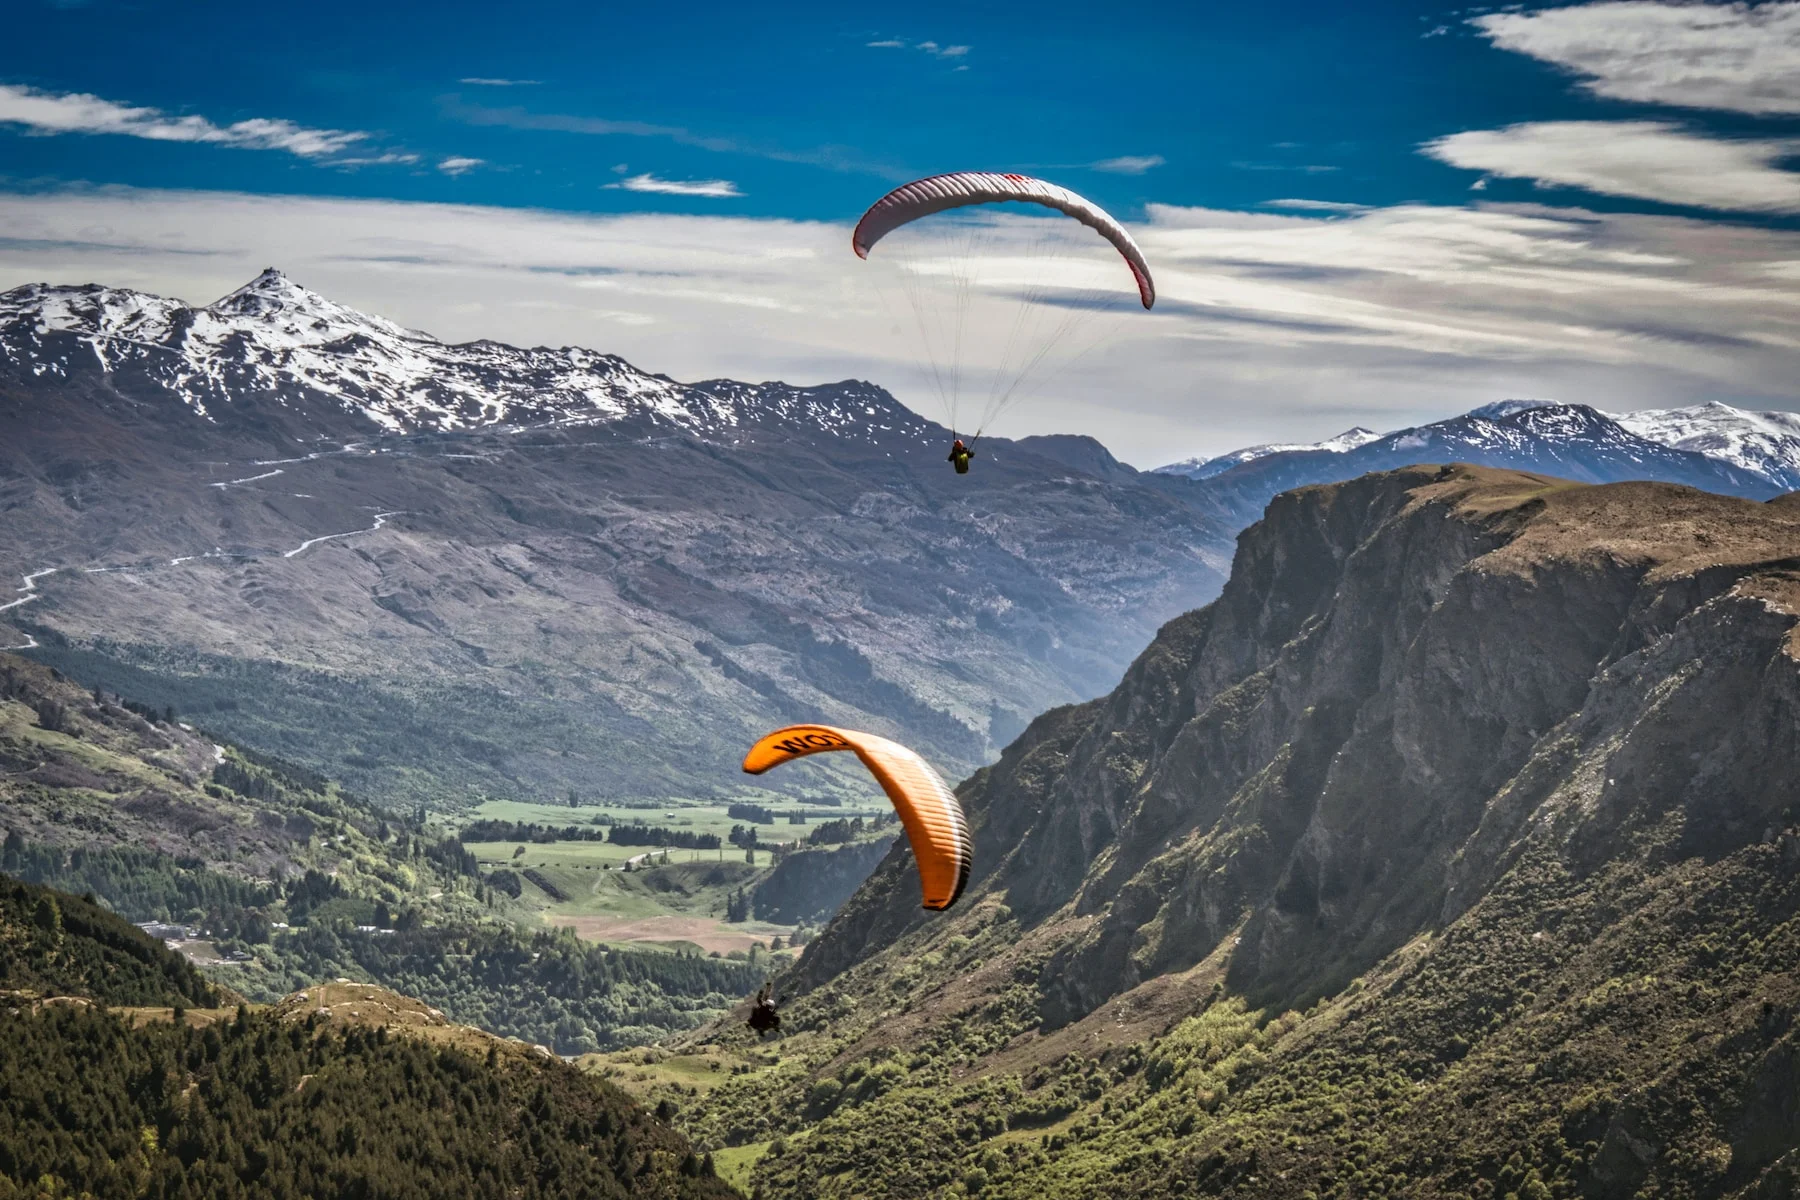 person in yellow parachute over mountains during daytime